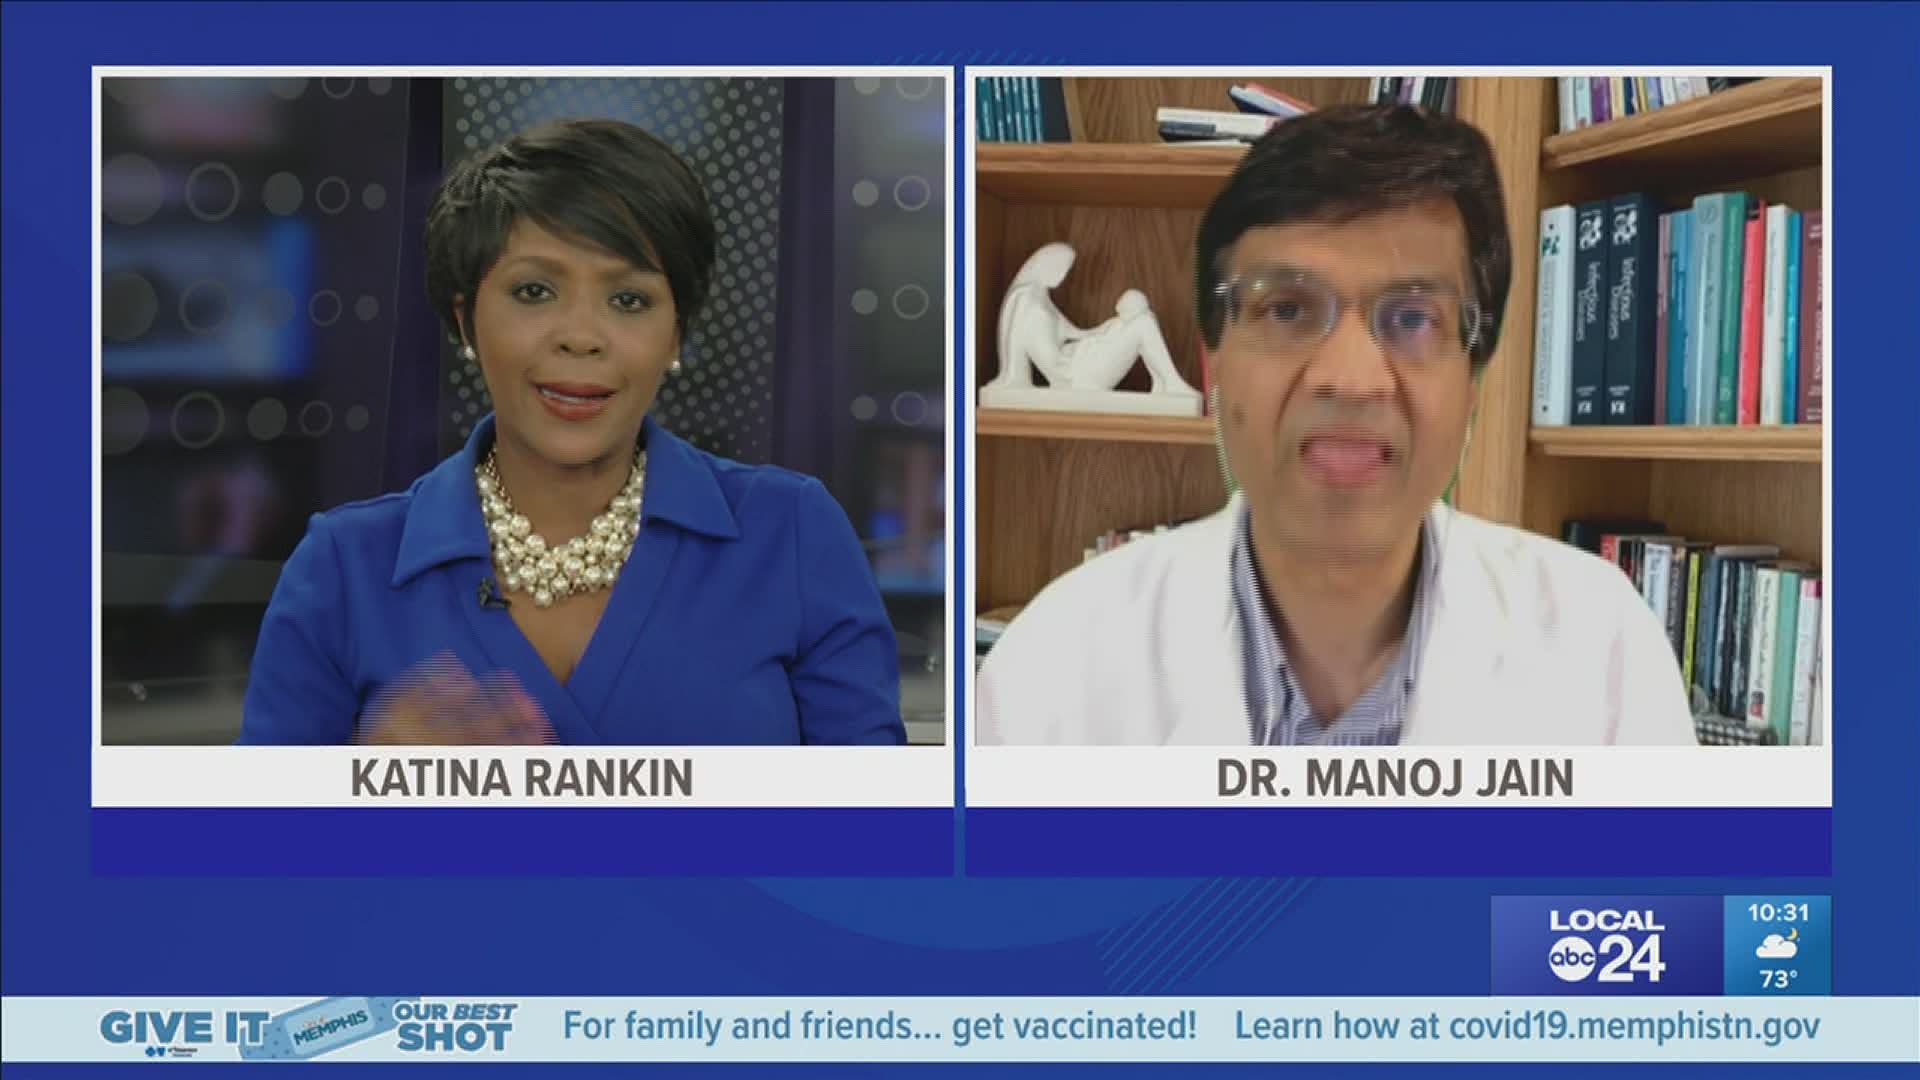 Dr. Manoj Jain is an infectious disease physician, writer, and national leader in healthcare quality improvement.